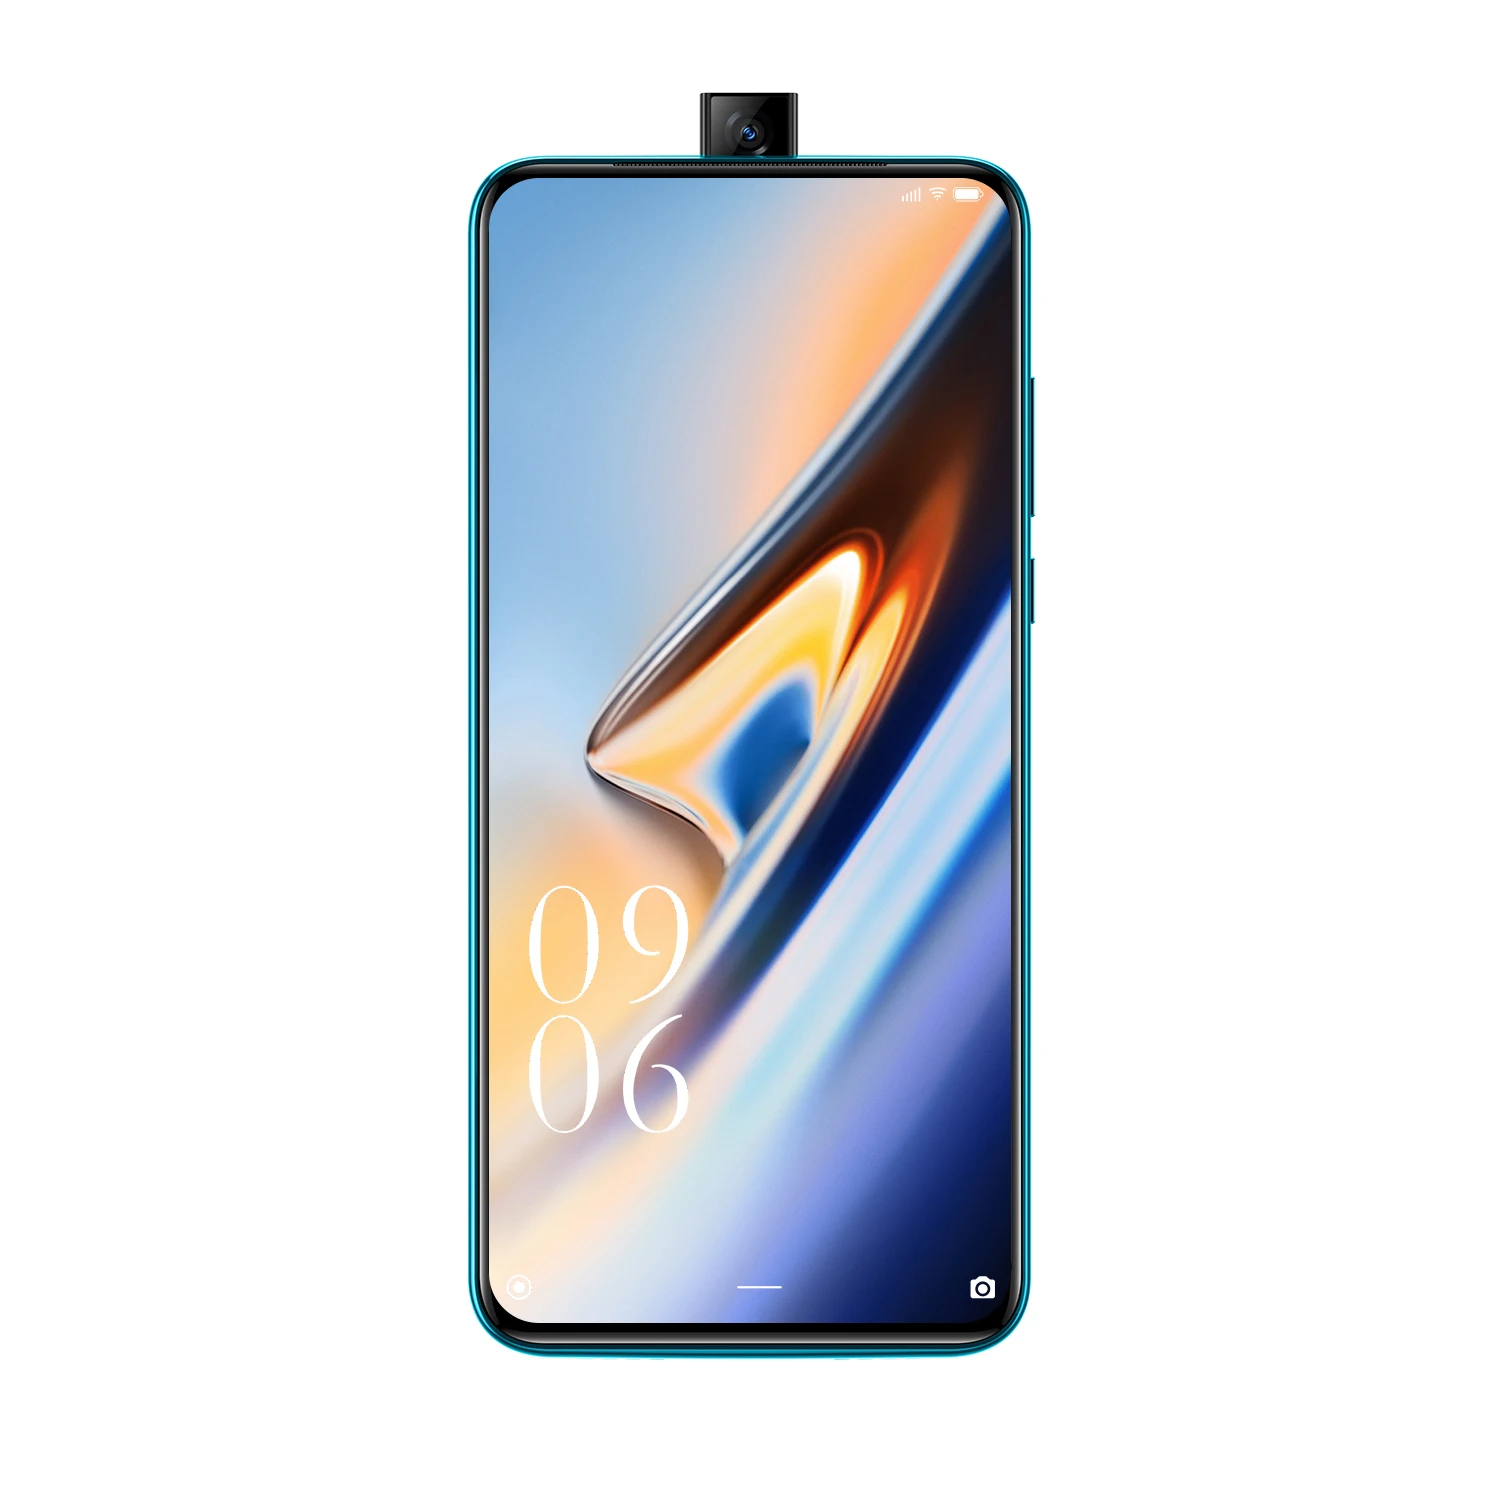 

ELEPHONE PX 4GB 64GB Mobile Phone MKT MT6763 6.53" FHD+ Full Screen 16MP Dual Rear Cam Android 9.0 Pop-Up 16MP Cam Smartphone